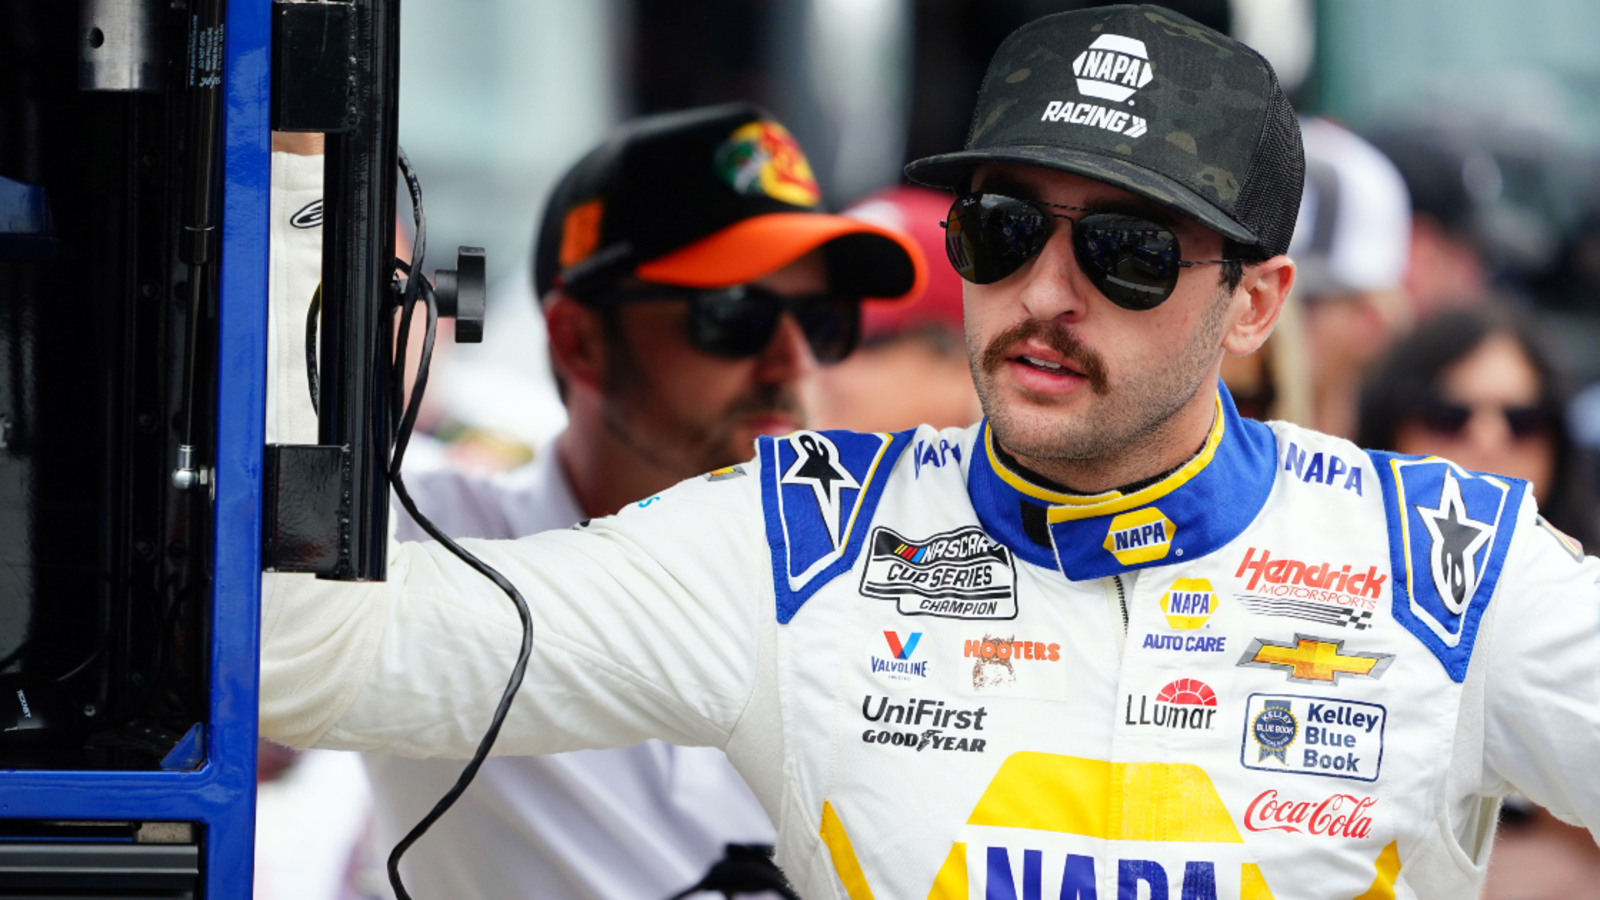 Chase Elliott’s playoff chances take major blow after wreck during FireKeepers Casino 400